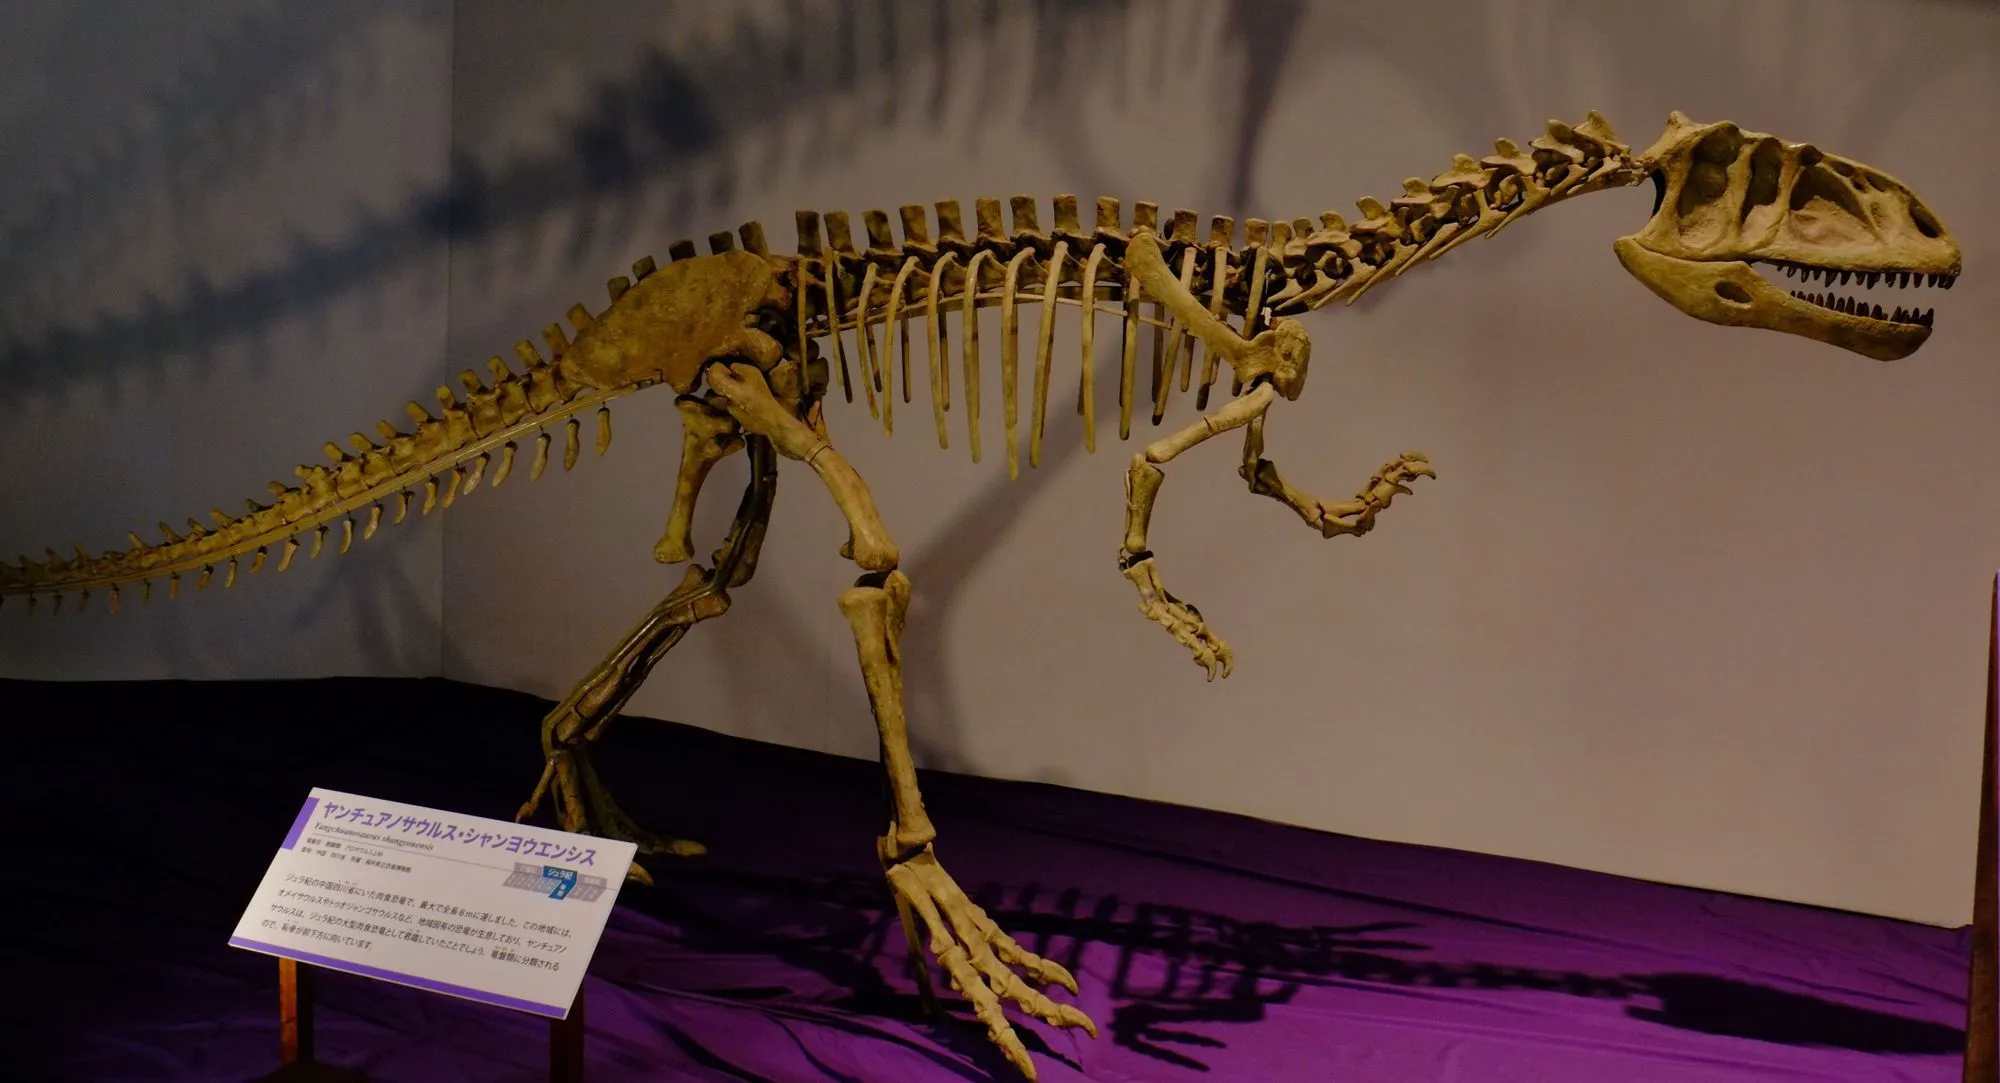 Yangchuanosaurus fossil was discovered in modern day China.